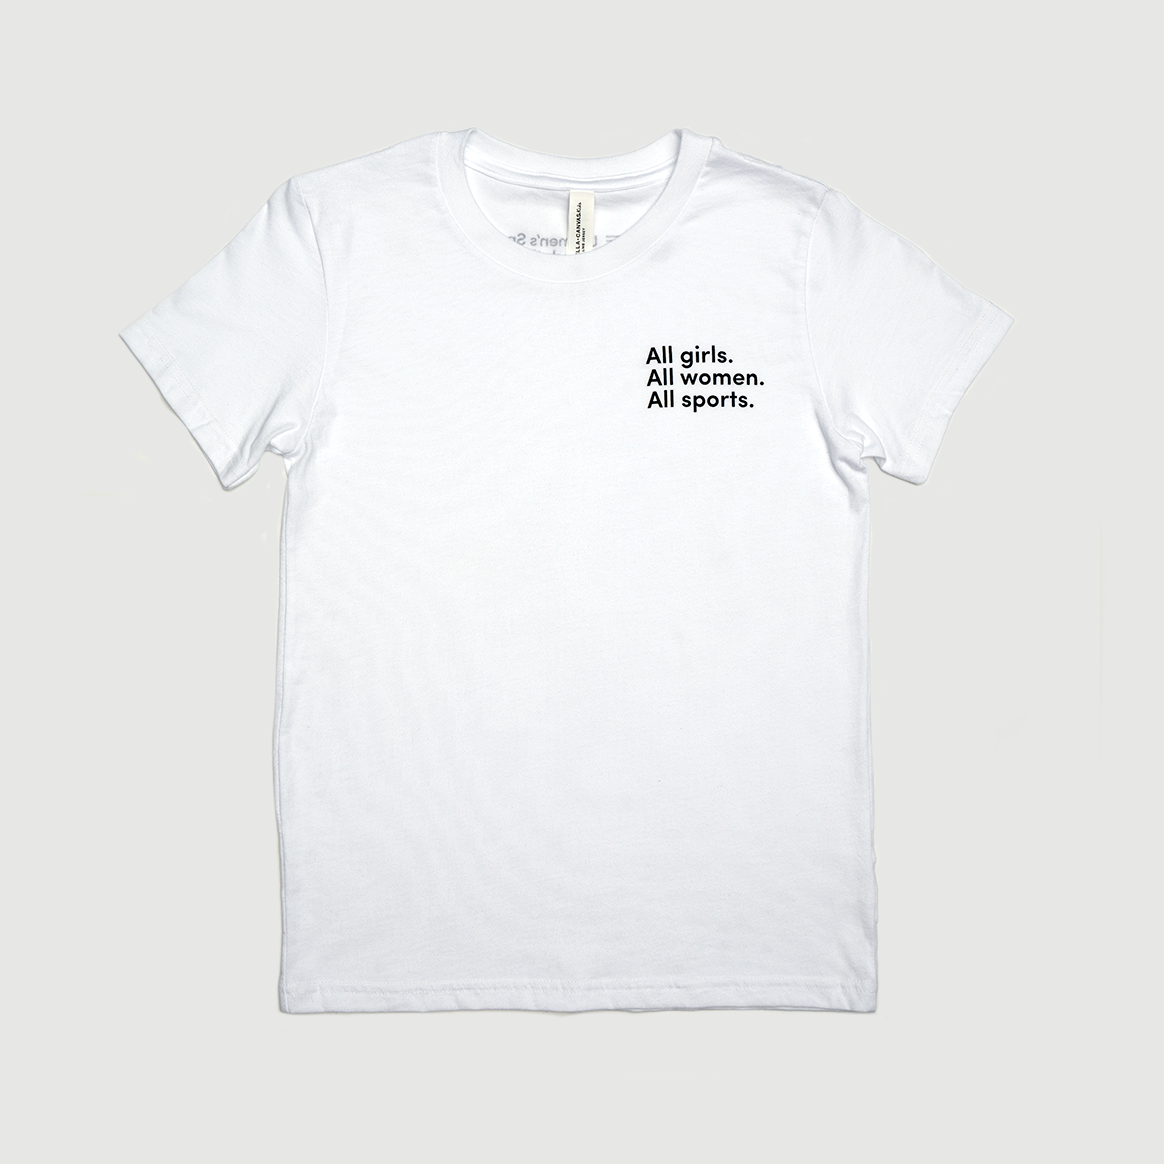 WSF Youth T-Shirt, in White - Women's Foundation